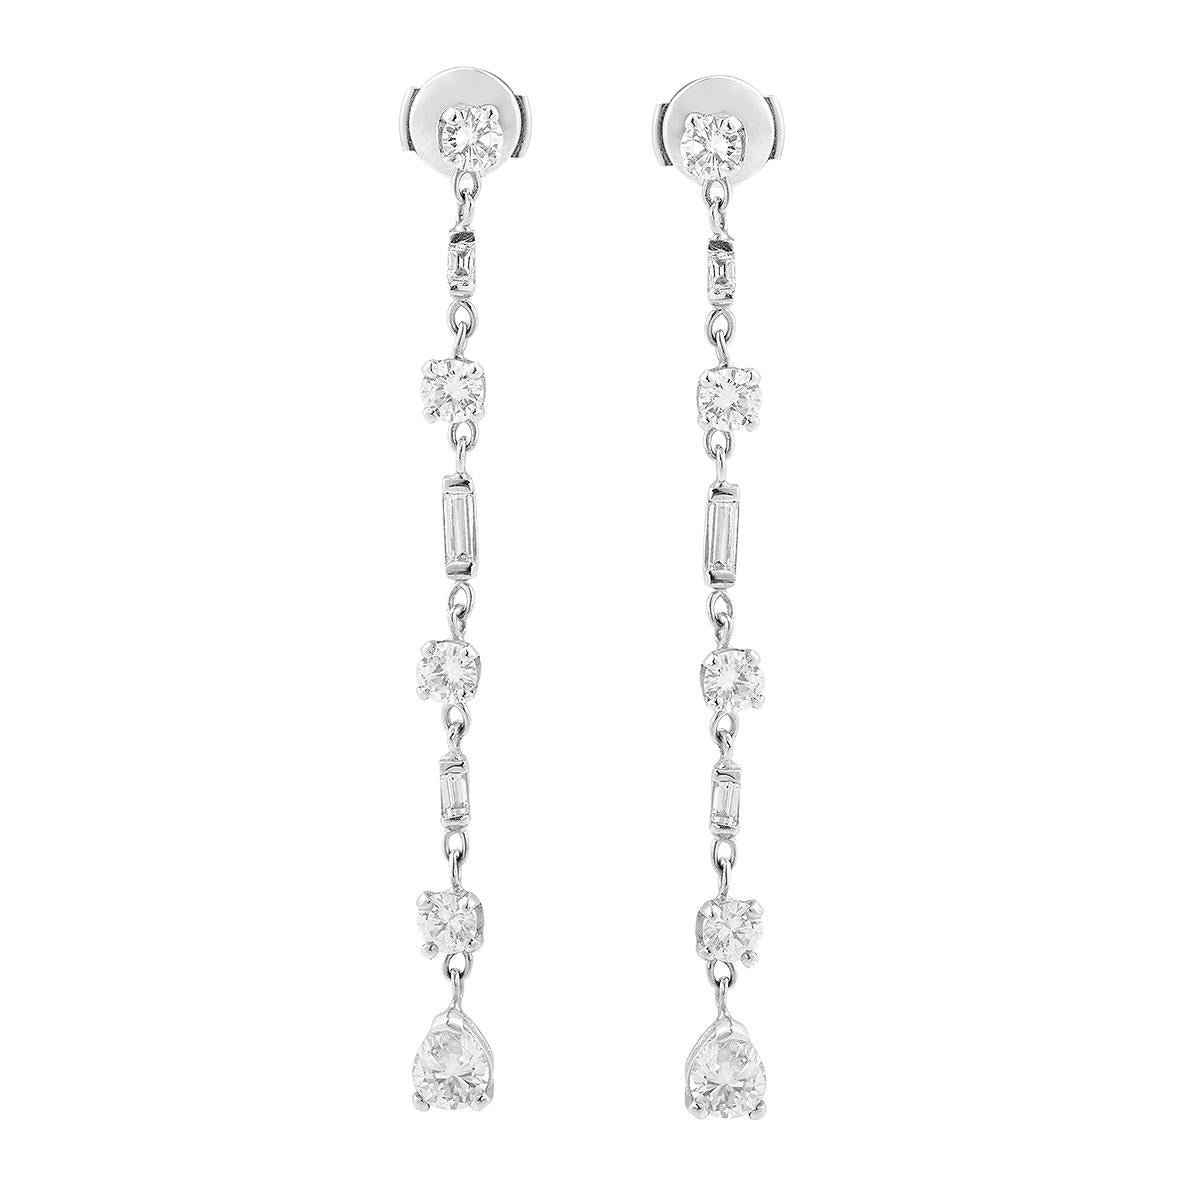 Stunning pair of earrings set with brilliant, pear and baguette cut diamonds.

Weight of the diamonds : 4.50 carats

The stones are set with 18 carat white gold (eagle's head hallmark).

Alpas security system clasp

Diamonds quality : 
Color : G